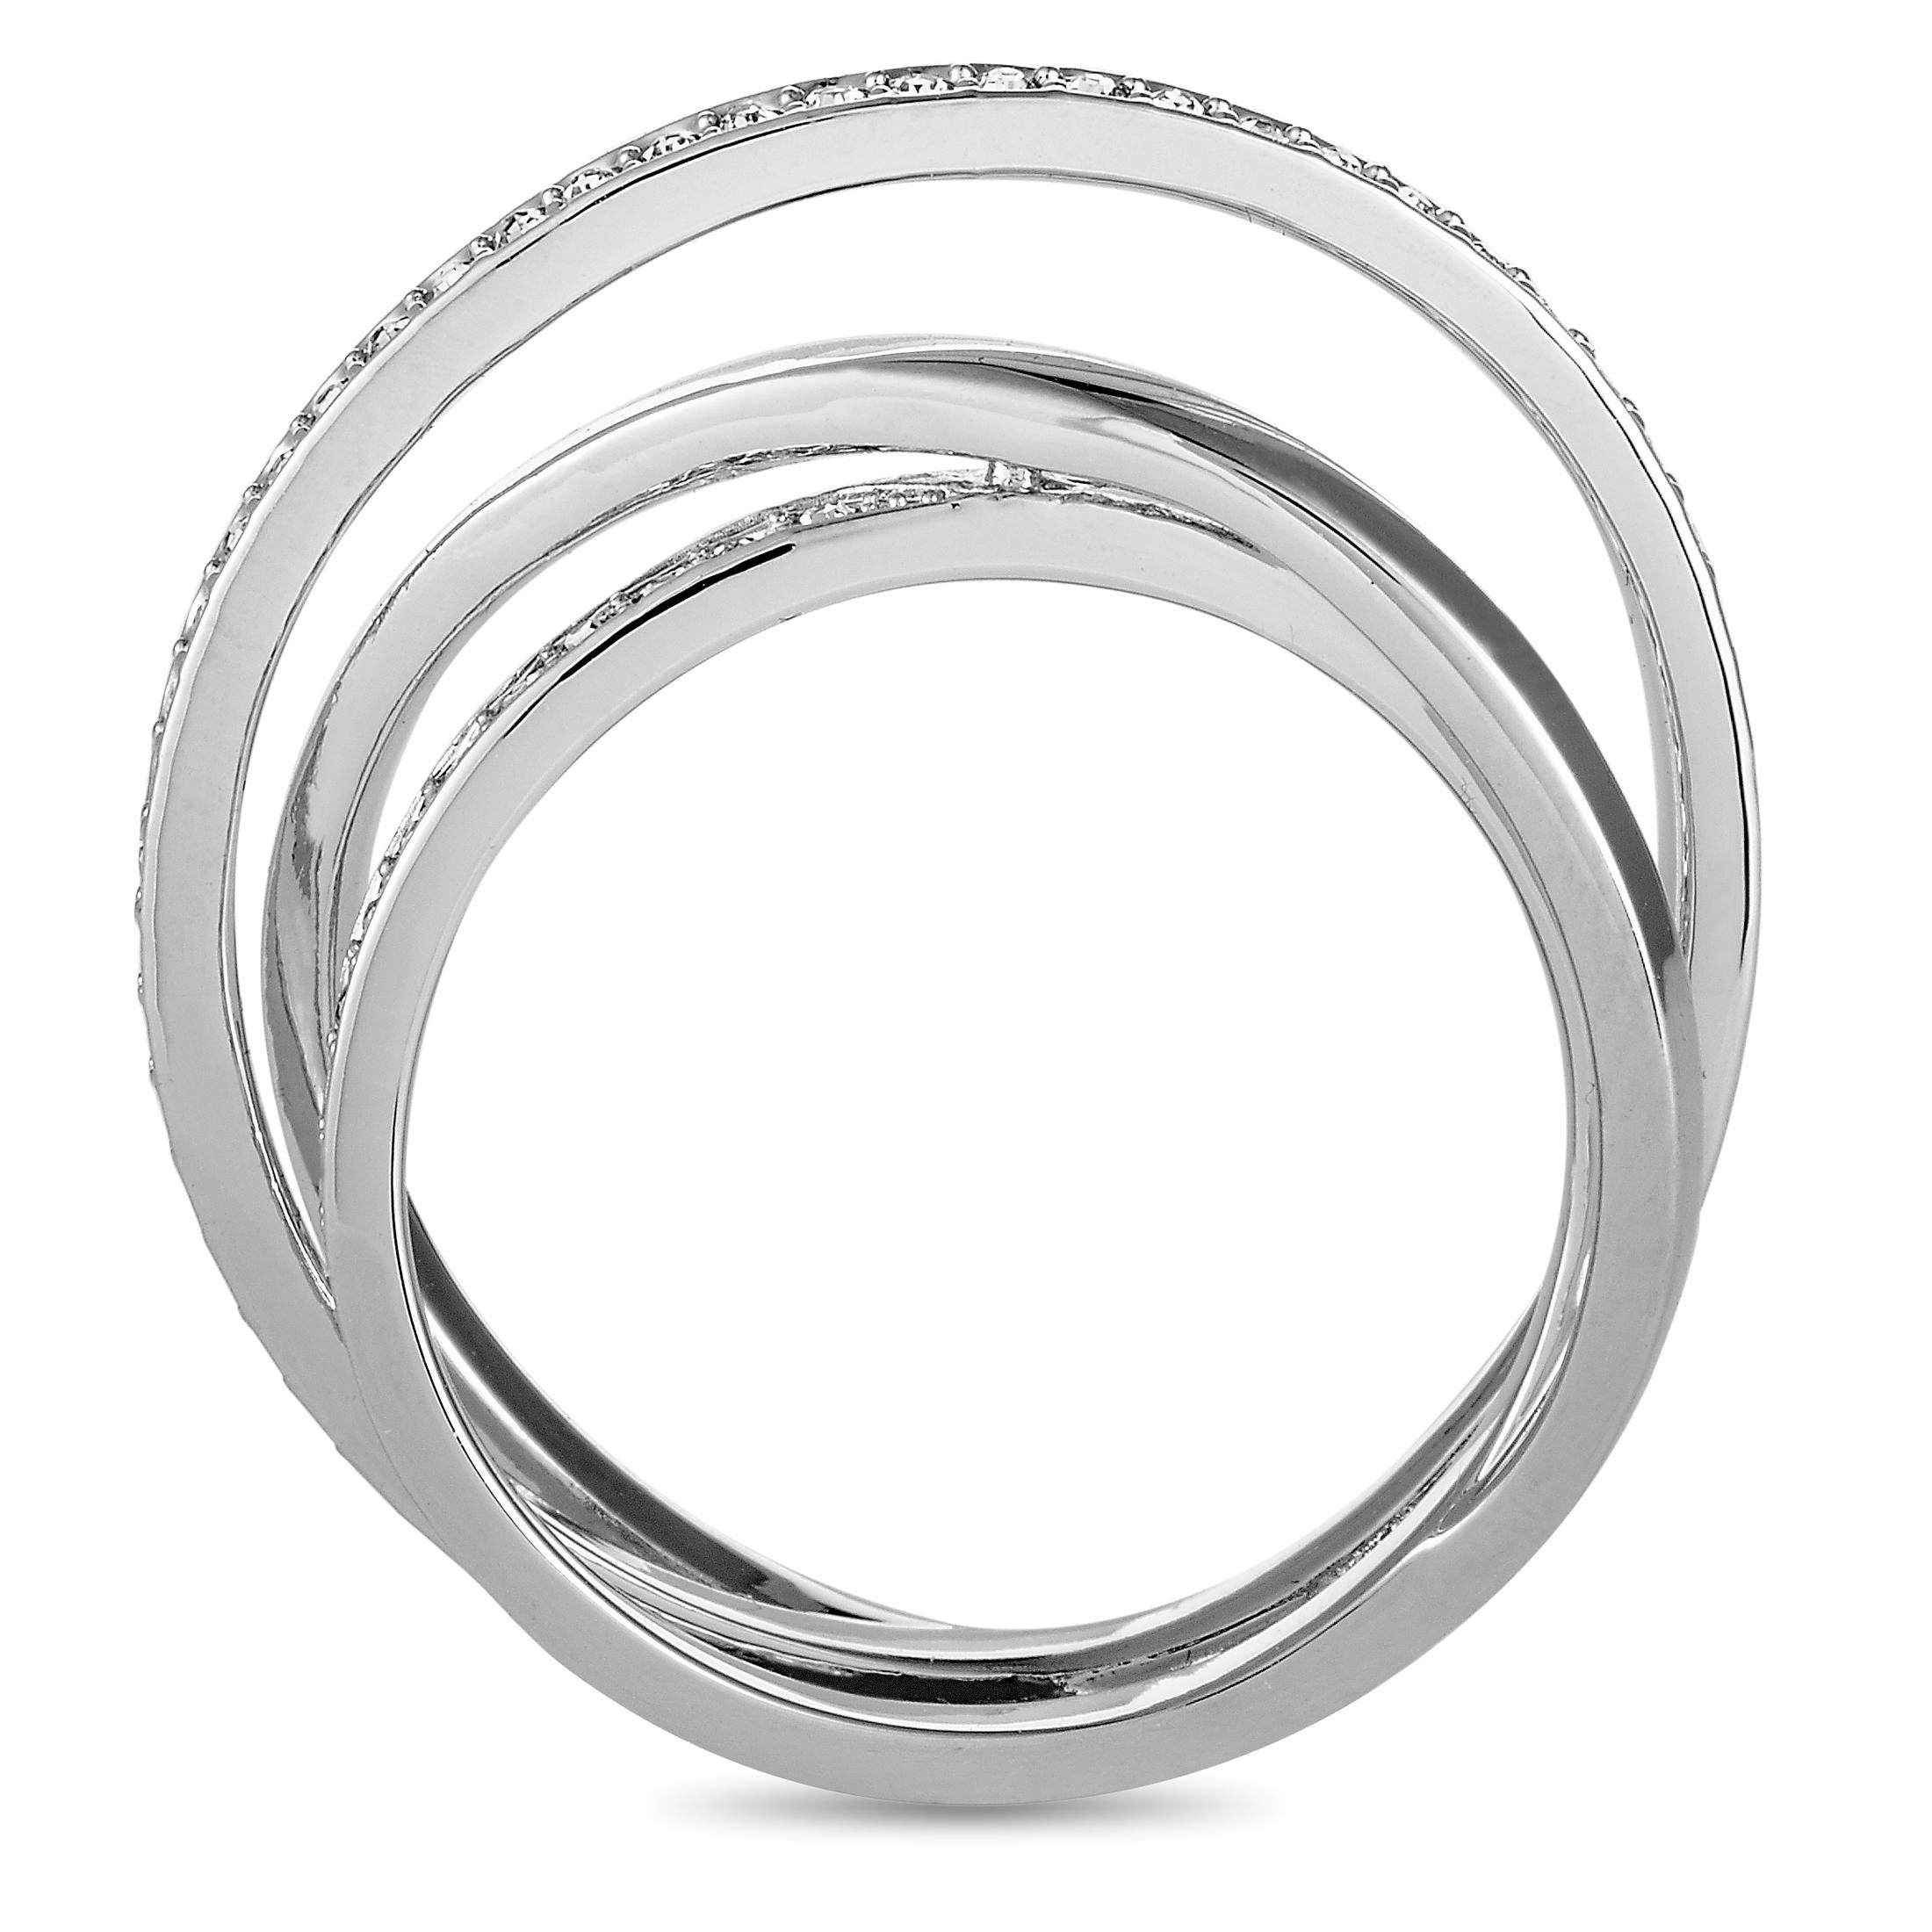 The Swarovski “Spiral” ring is made out of rhodium-plated stainless steel and crystals, and weighs 4.1 grams. It boasts band thickness of 5 mm and top height of 7 mm, while top dimensions measure 25 by 5 mm.
 
 Offered in brand new condition, this